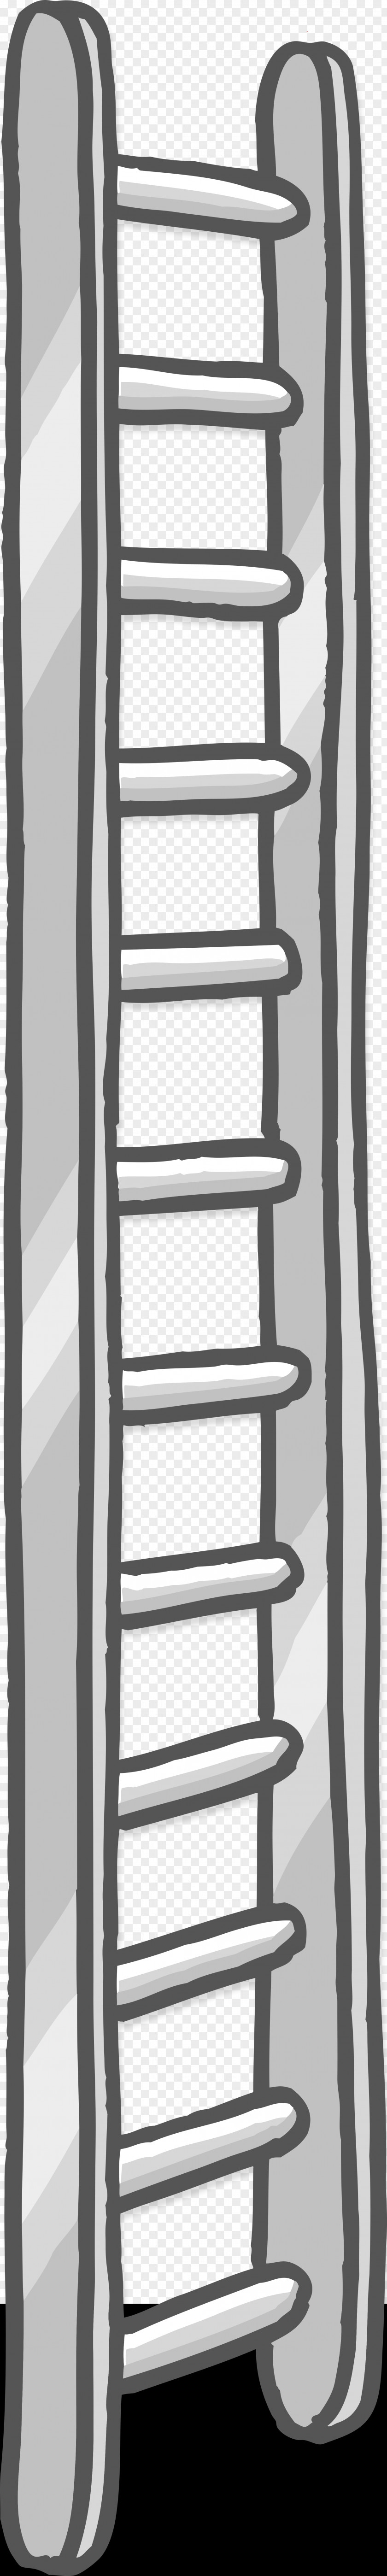 Ladder Stairs Icon PNG